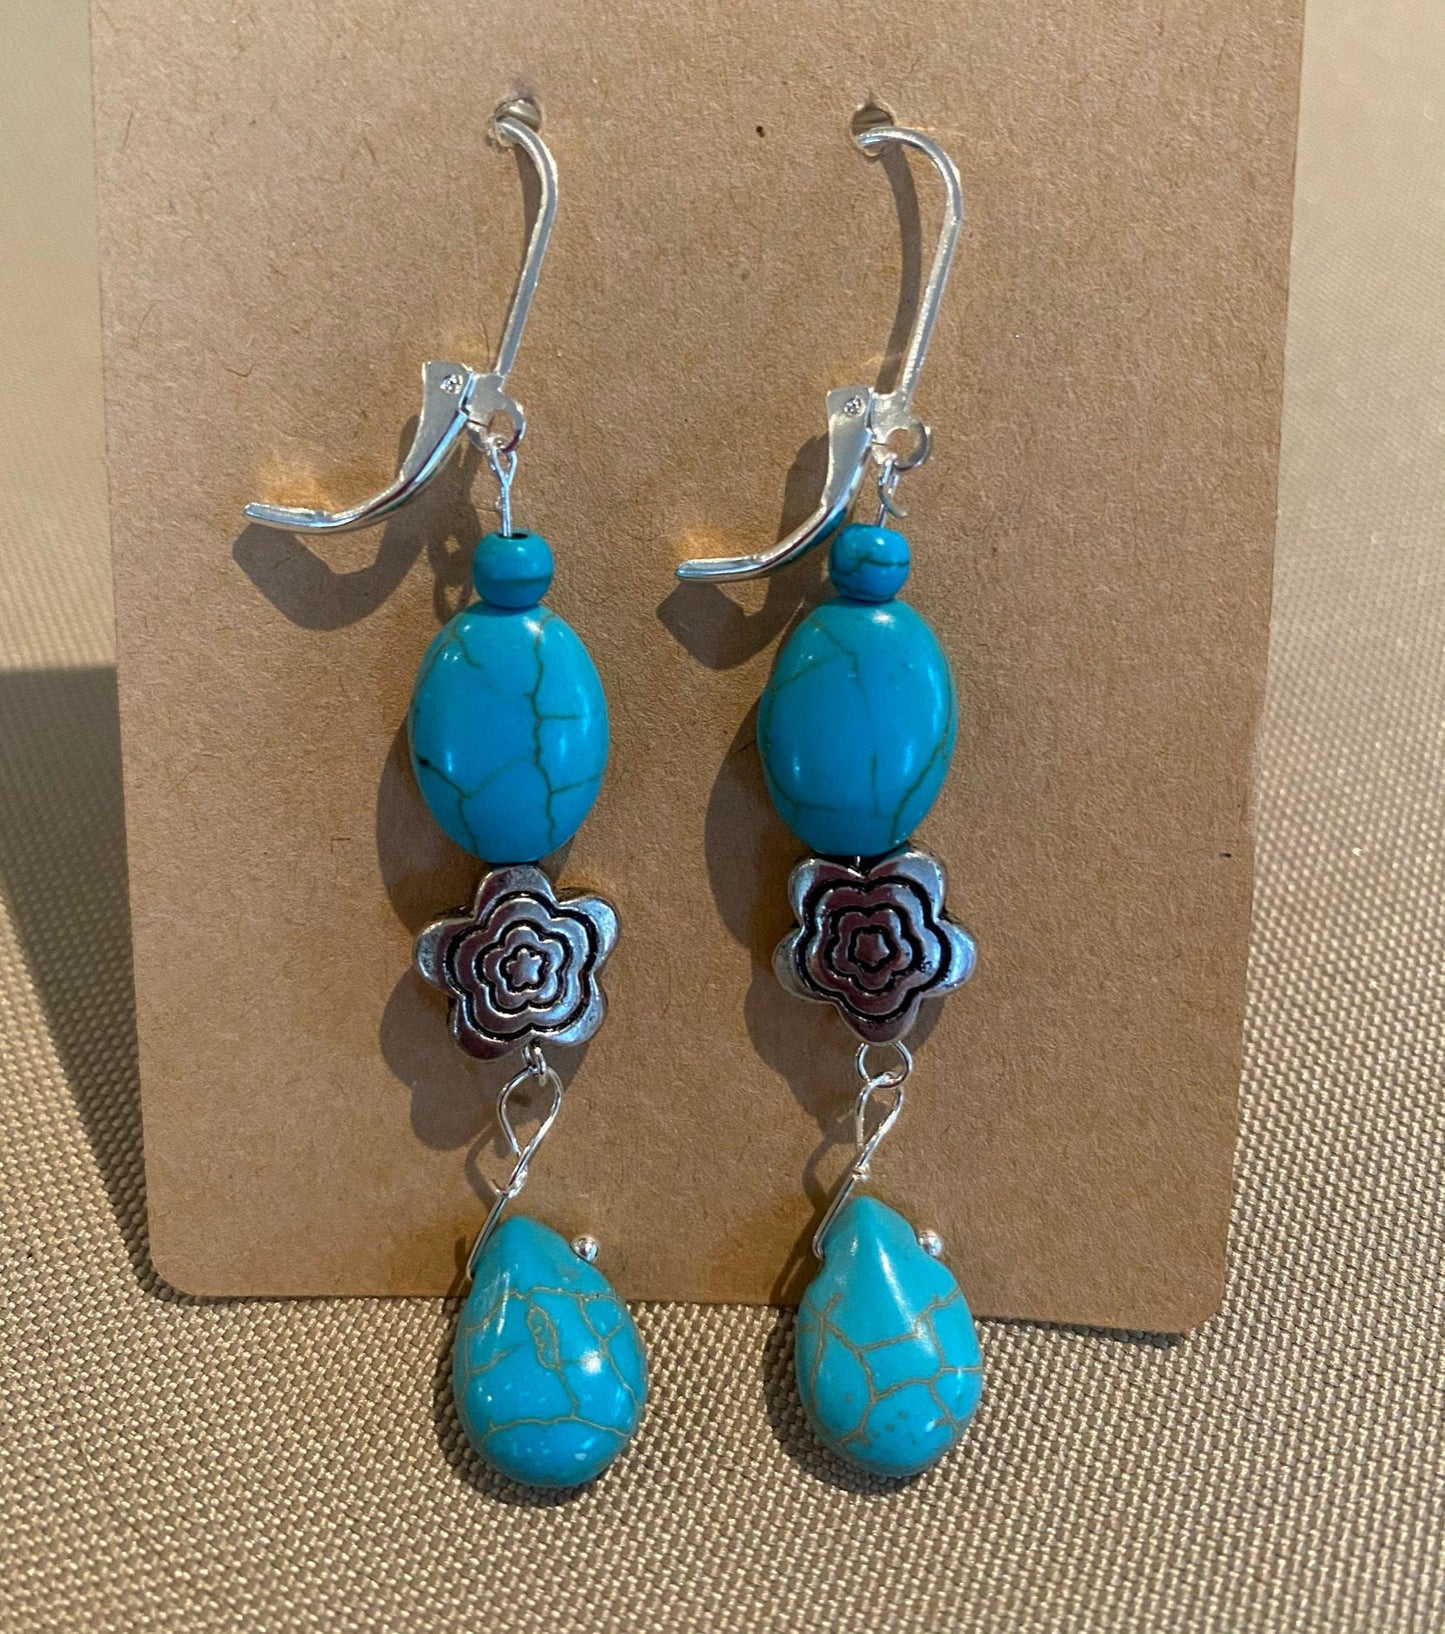 Turquoise Beads with Silver Flower Earrings